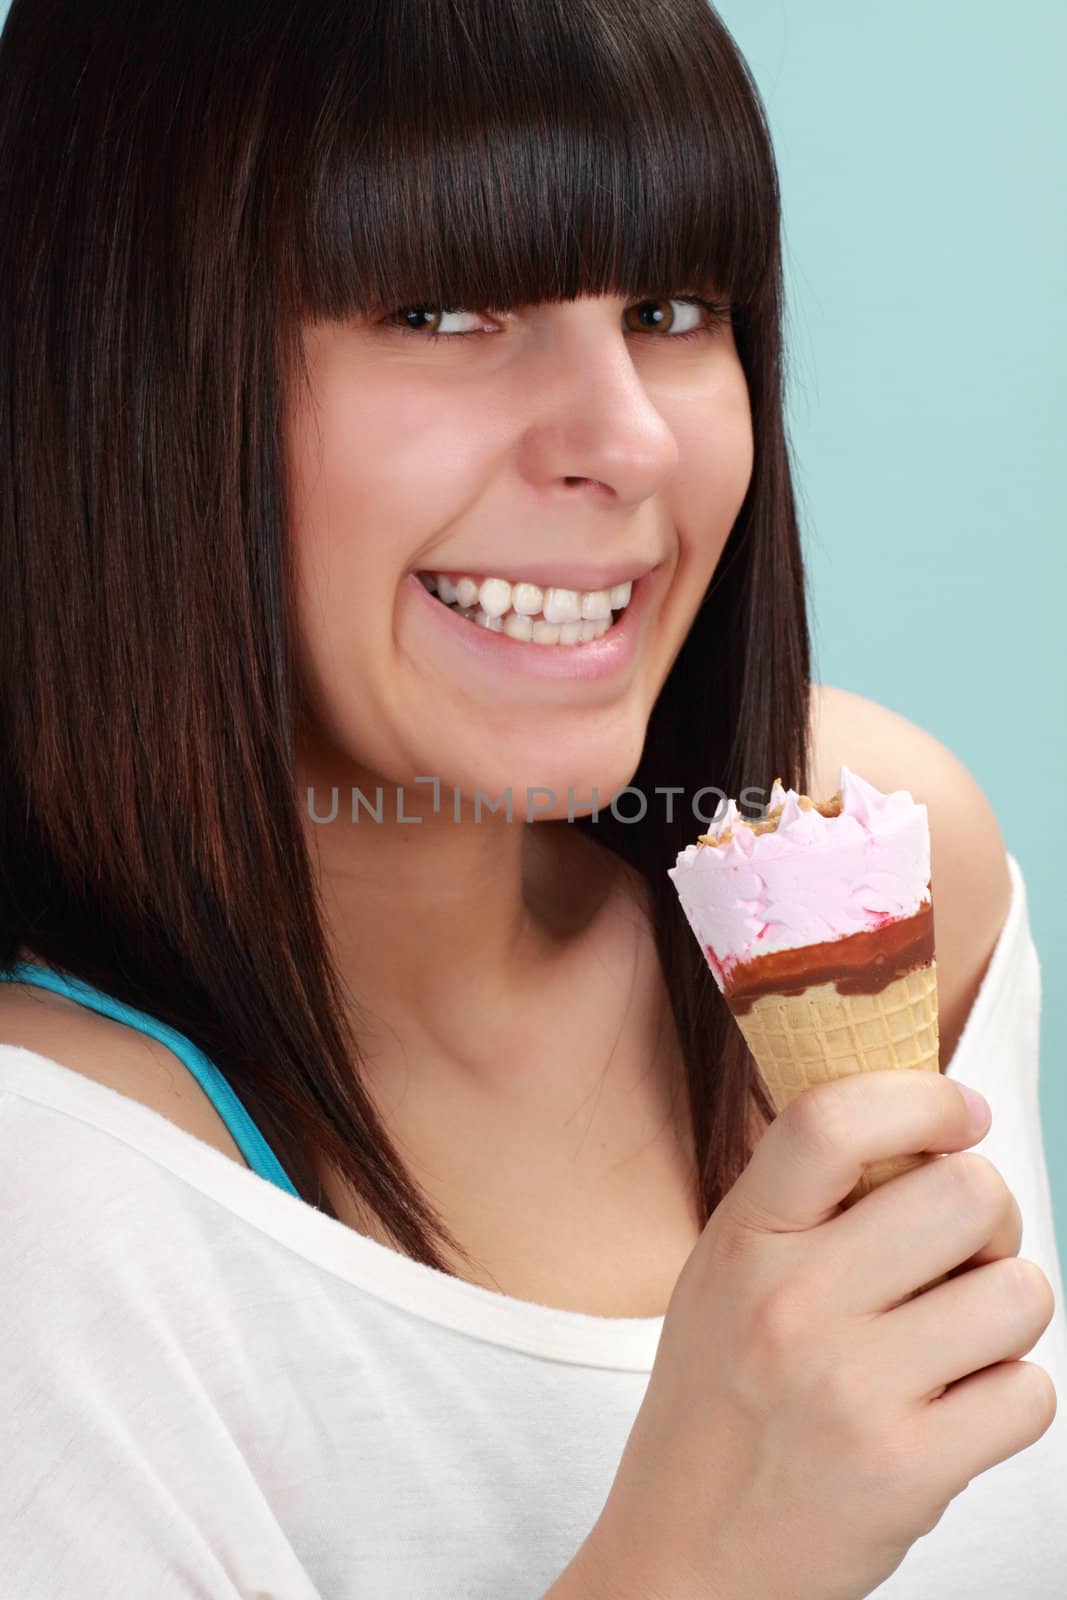 Cute girl holding an ice cream cone, blue background